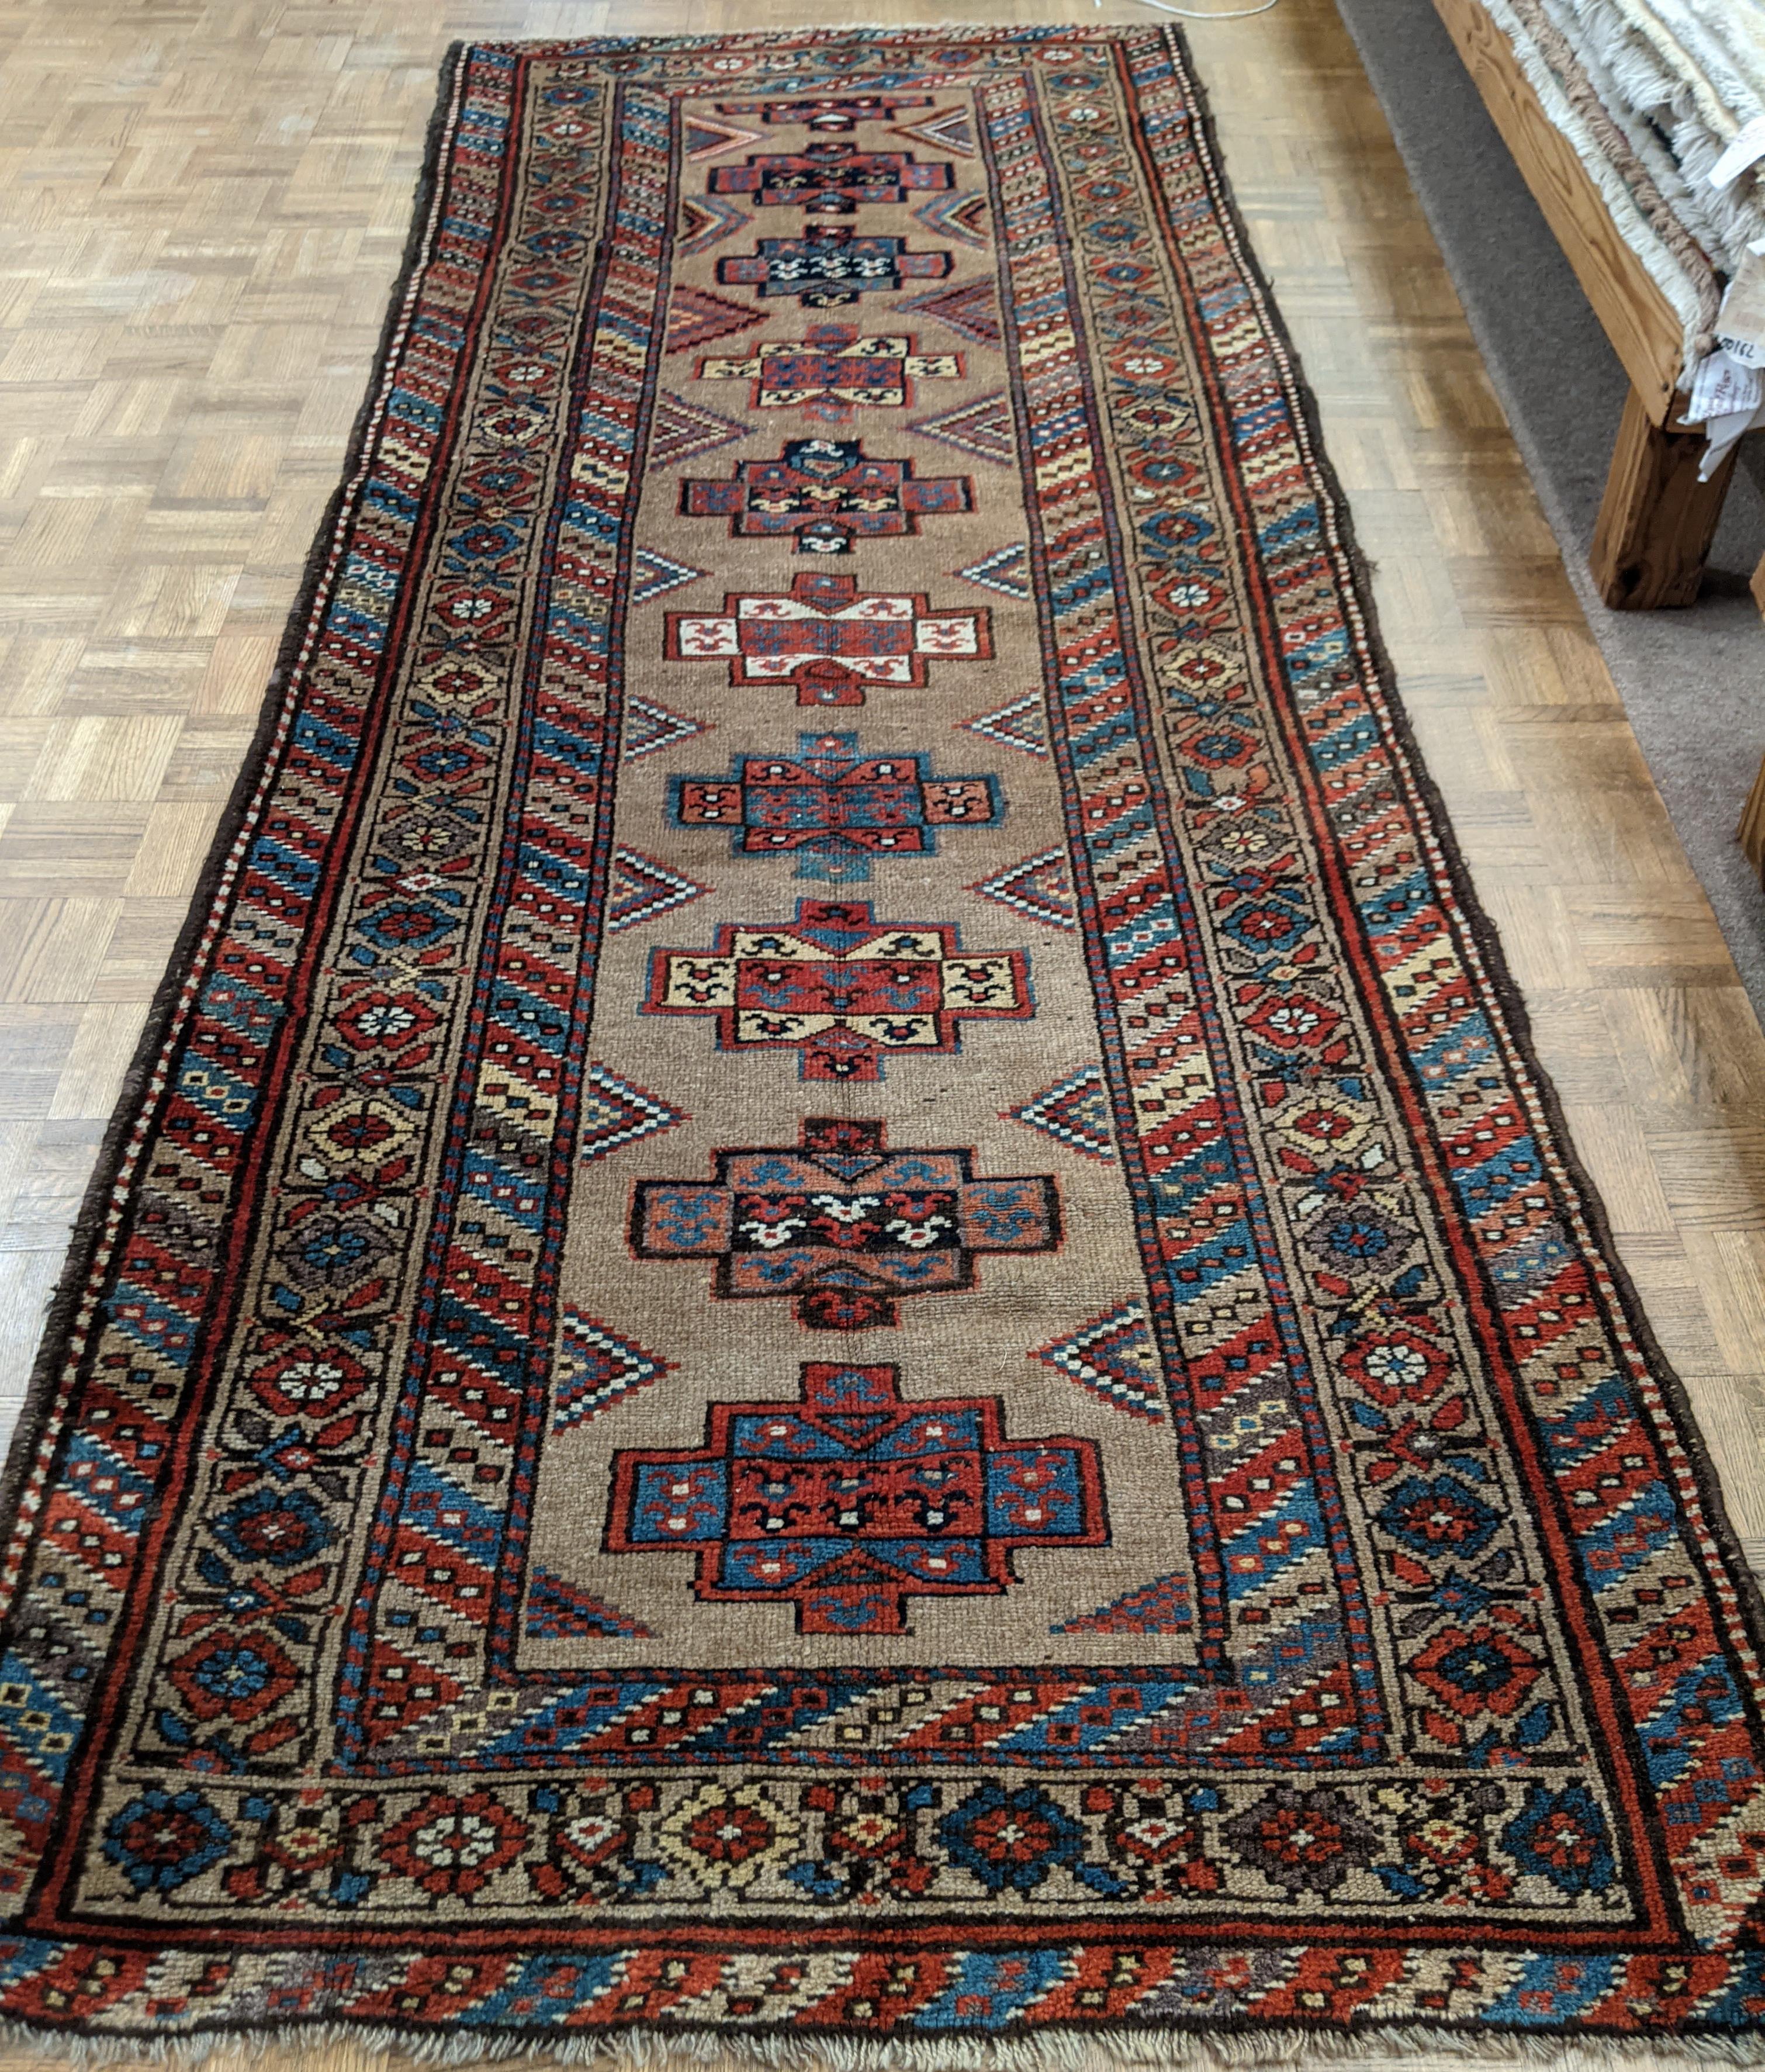 This is a early antique Persian Serab. Serab rugs are known for their geometric design as well as the use of camel color. an aypical Serab motif with the use of a cinnamon rust color is accented on the camel field in a motif similar to Mogan Kazak